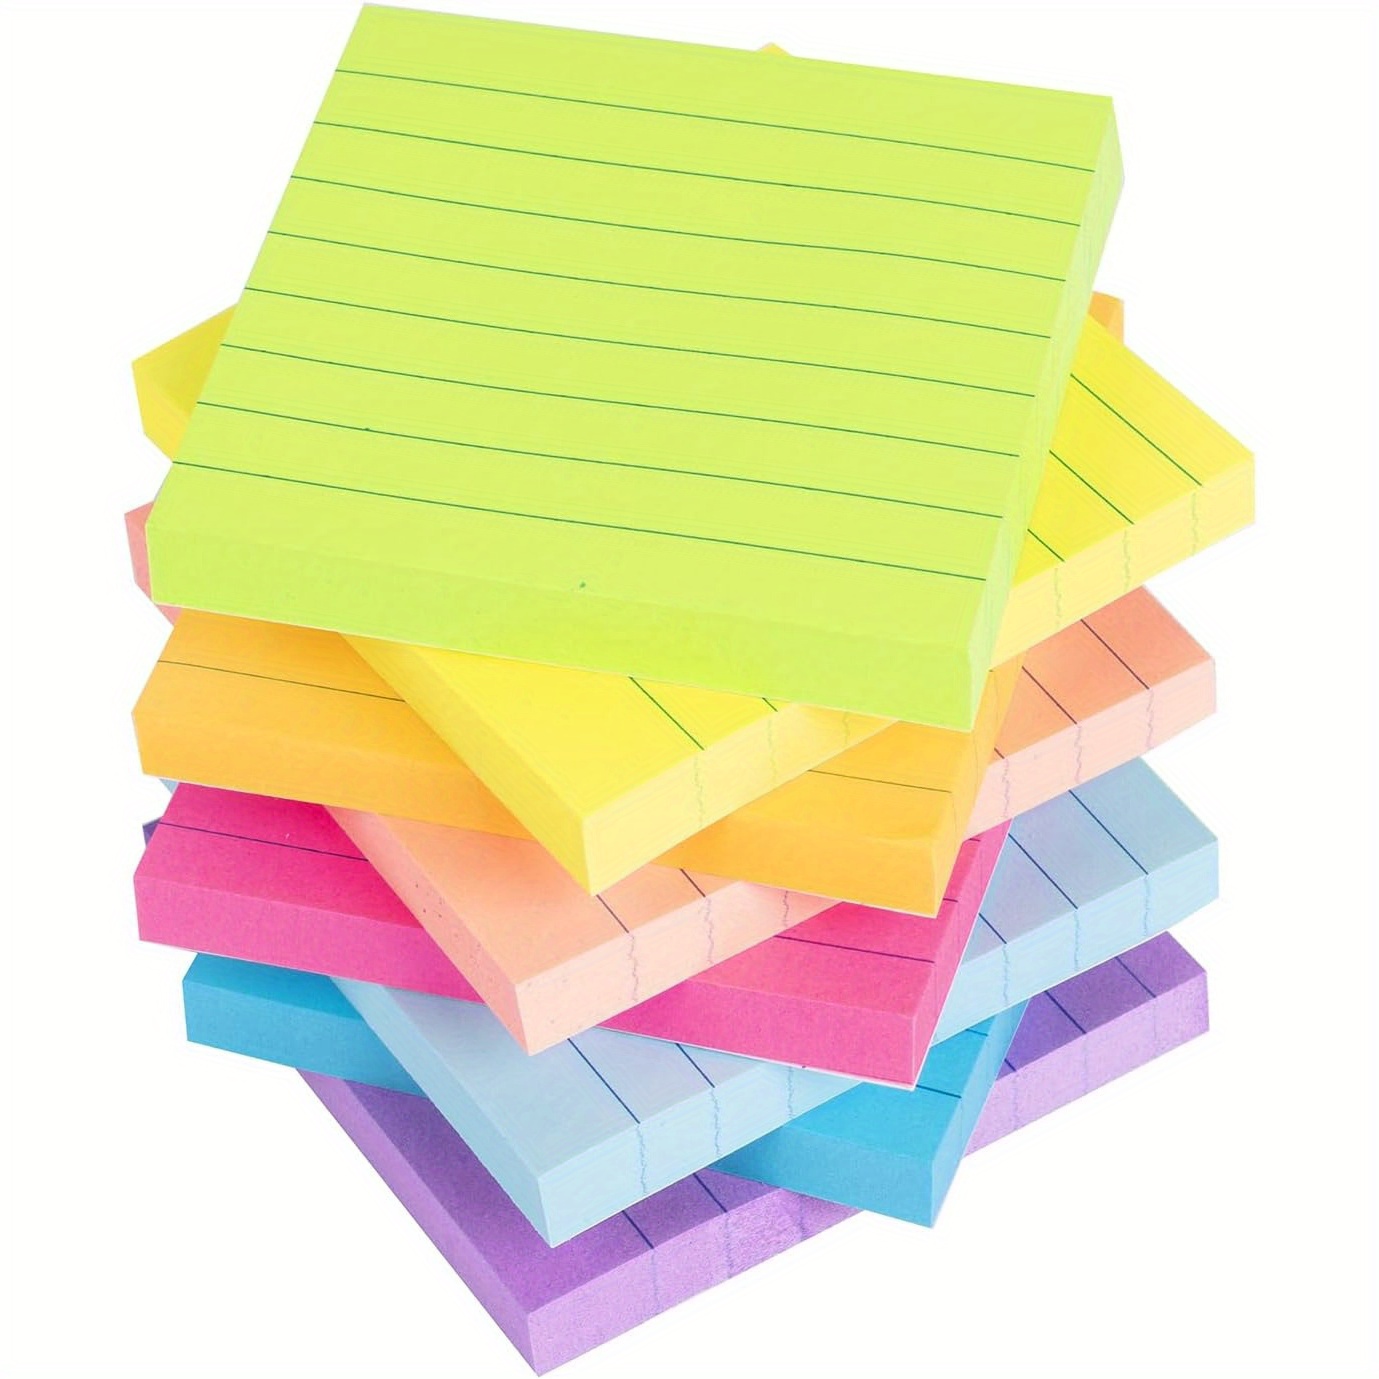 

Bright Lined Sticky Notes 8-piece, 3x3 Inch, Super Strong Adhesive Memo Pads, Colorful Sticky Note Notes, 50 Sheets Each